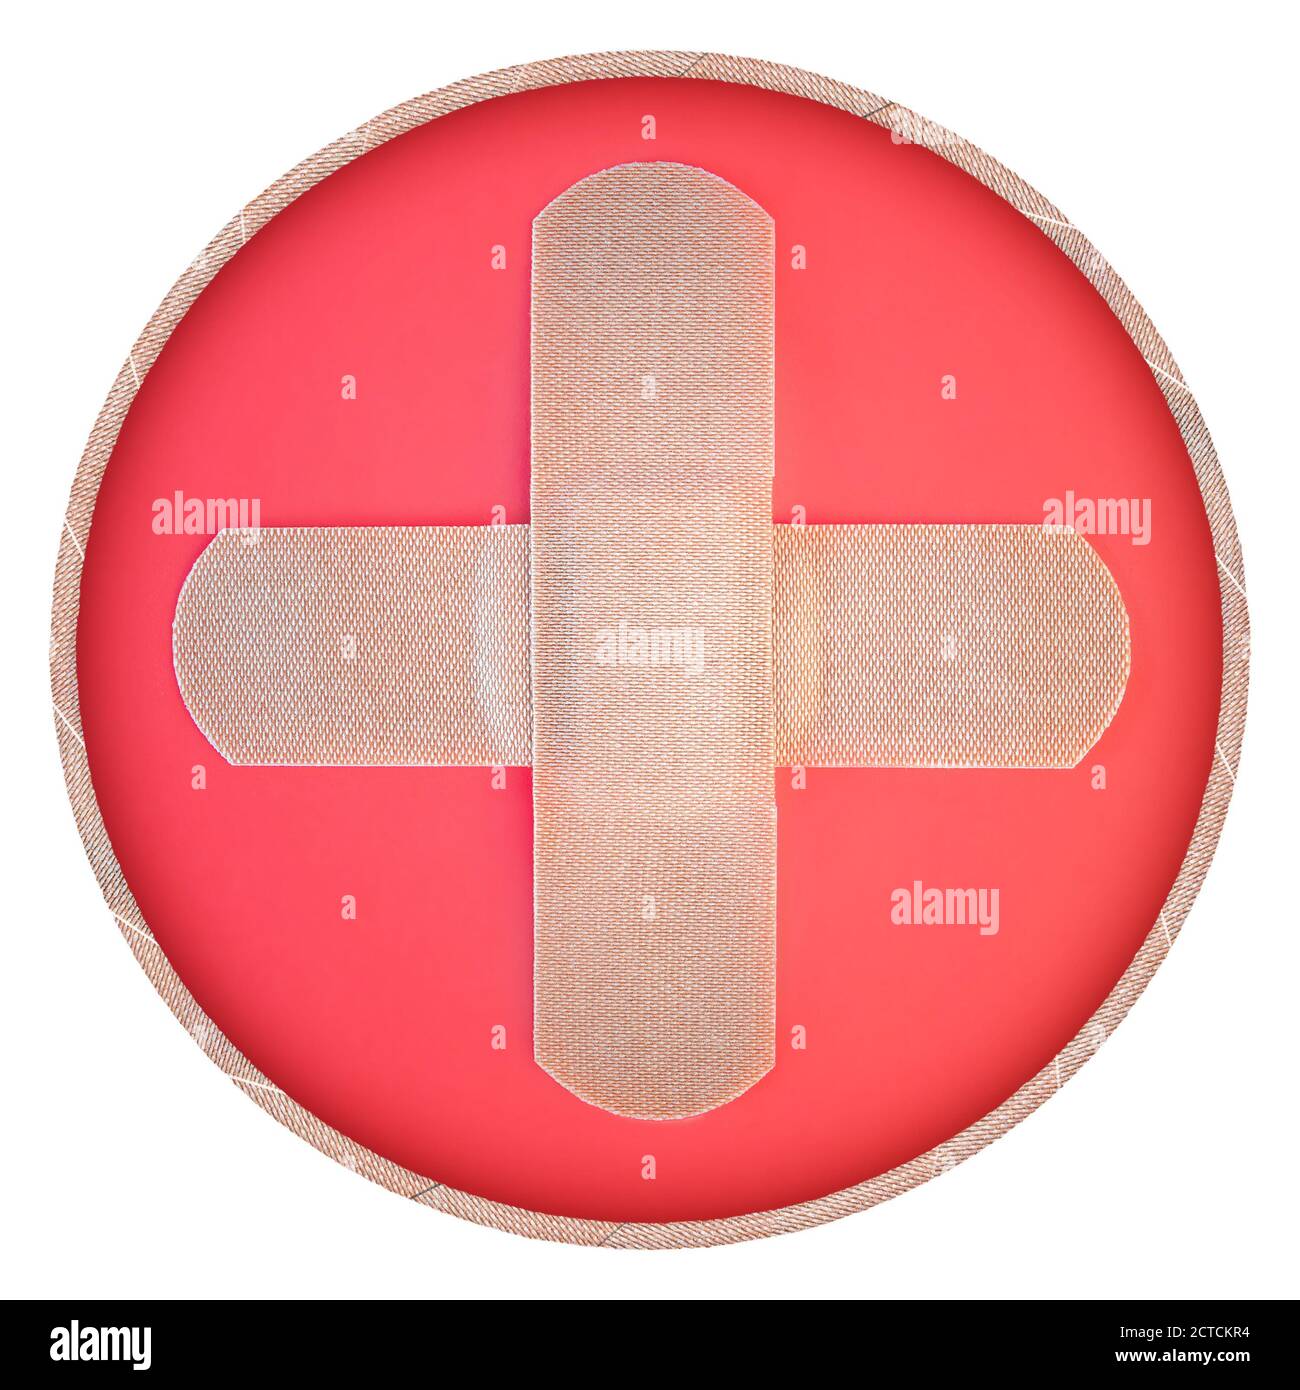 Real fabric bandaid / bandages in shape of a medical plus sign. Round icon. Symbol for: Hospital, emergency, first aid, medical or health. Stock Photo